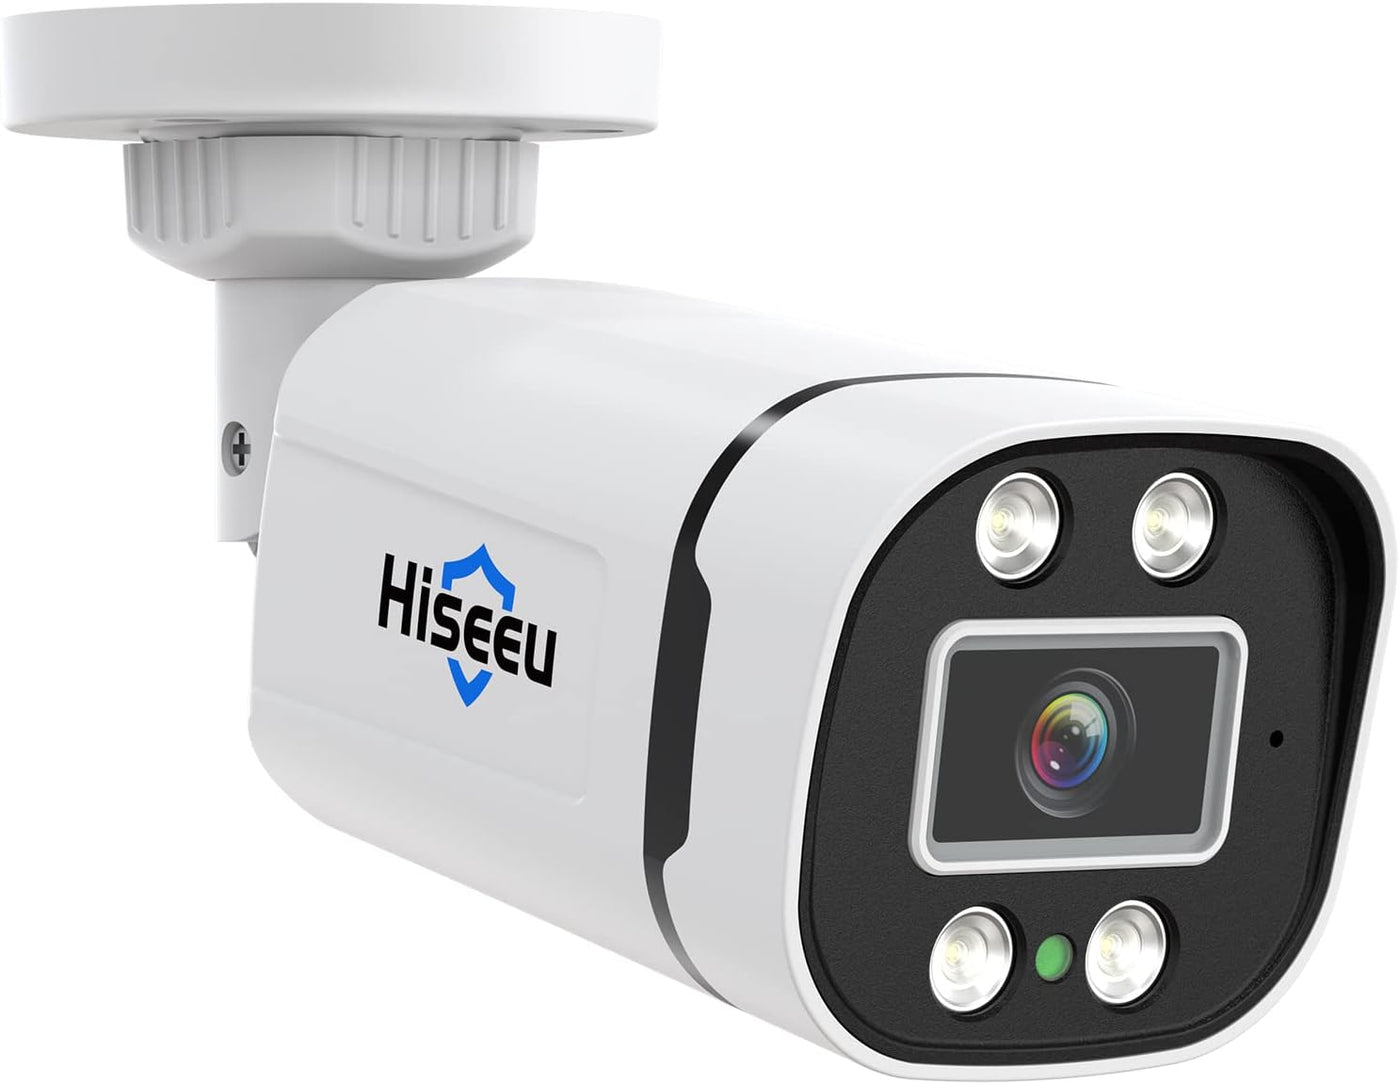 Hiseeu HD 5MP Analog/AHD/CVI/XVI 2560 TVL Wired Security Camera Outdoor for 5MP Analog Surveillance Dvr Kits, IP 66 Waterproof, Clear Night Vision up to 60ft, Remote Access - Hiseeu